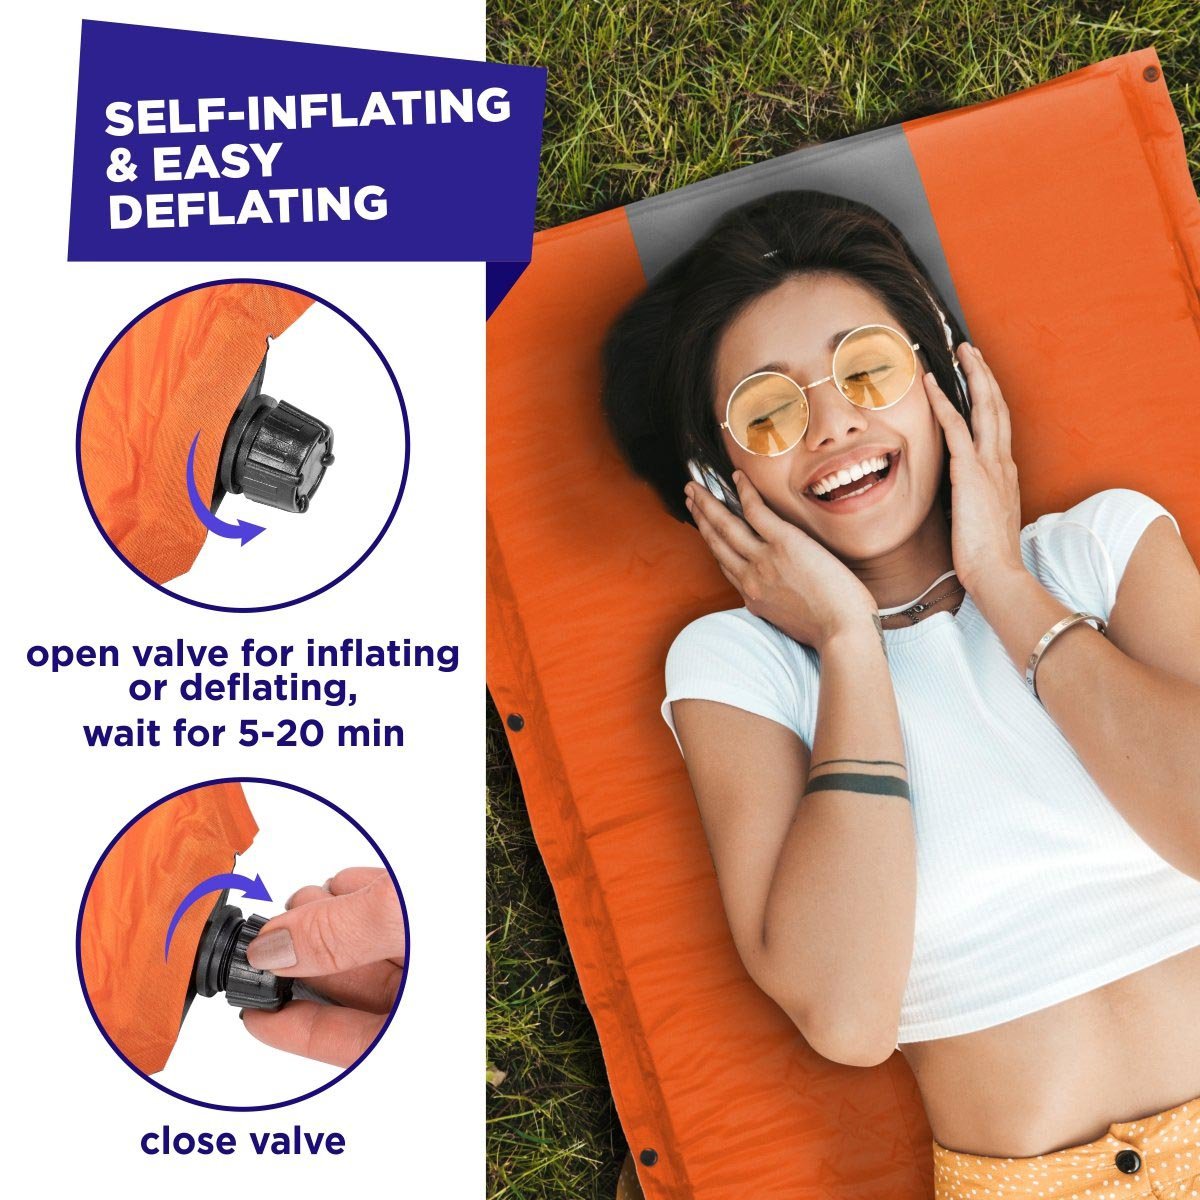 Orange Self Inflating Sleeping Pad is very easy to setup - just open the valve, wait until the matress inflates, and close the valve